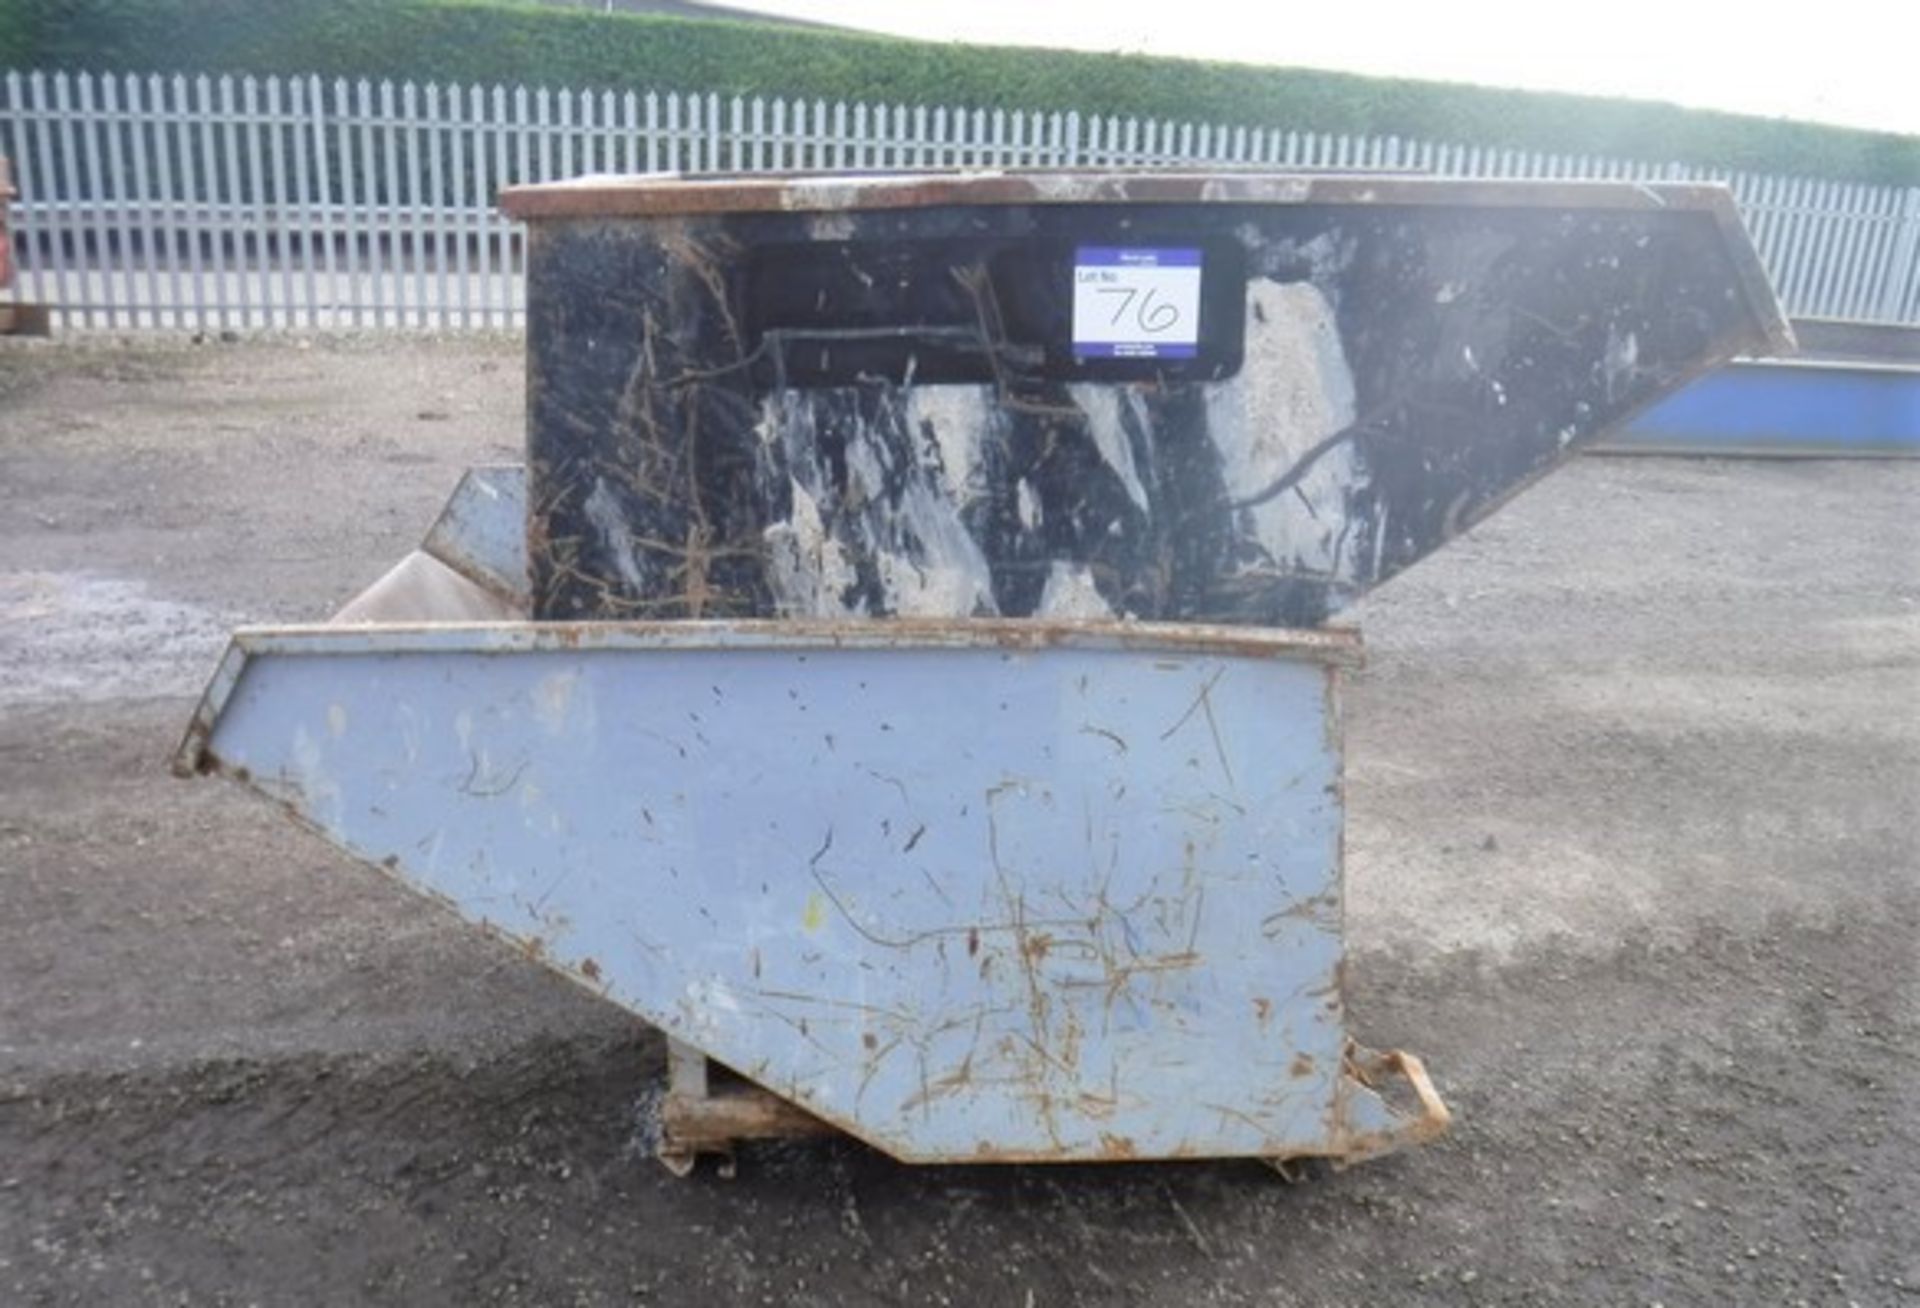 2016 CONQUIP 1200ltr tipping skips x 2 S/N CQ52900 & CQ52909. Asset nos 6247 & 6255 - Image 3 of 6